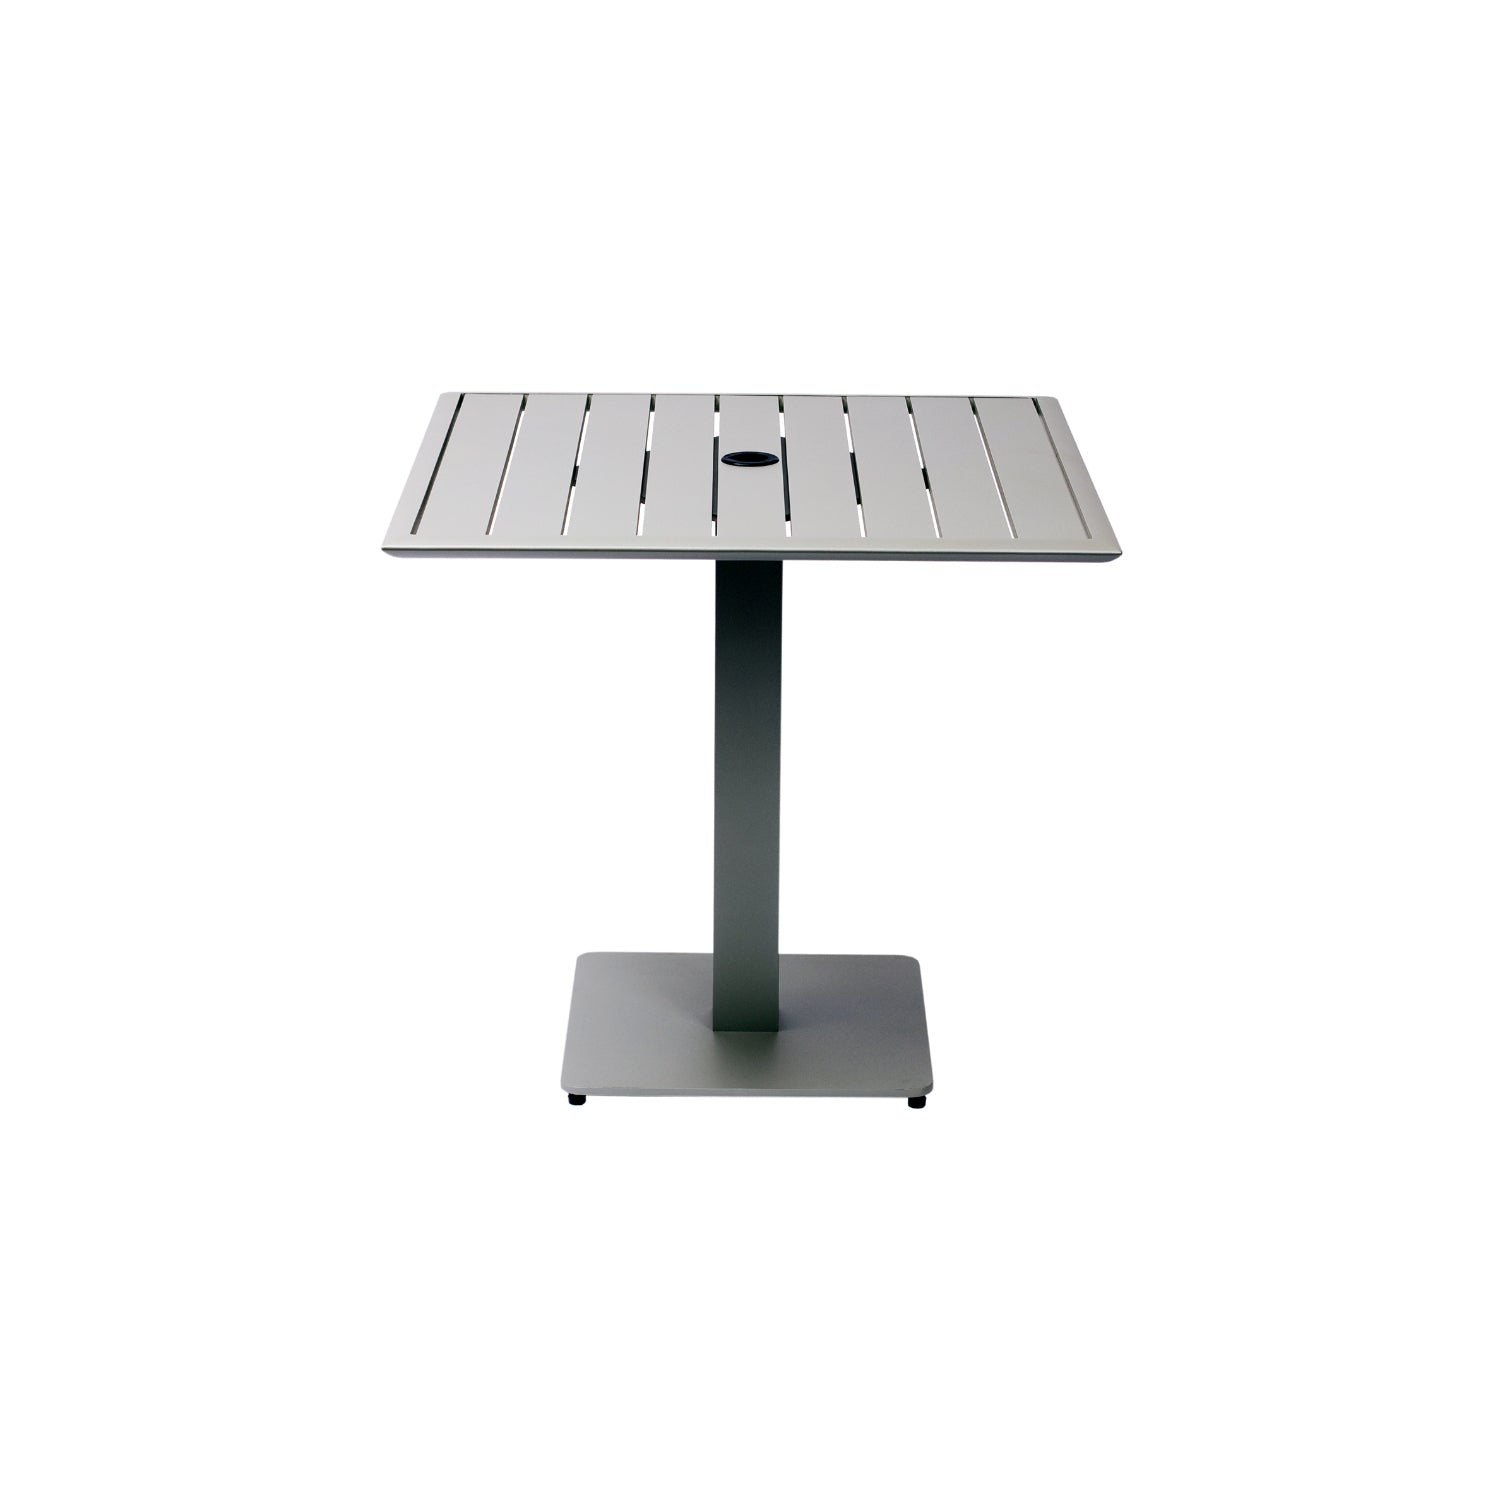 South Beach Collection Outdoor/Indoor 32" Square Titanium Silver Aluminum Dining Height Table with Umbrella Hole